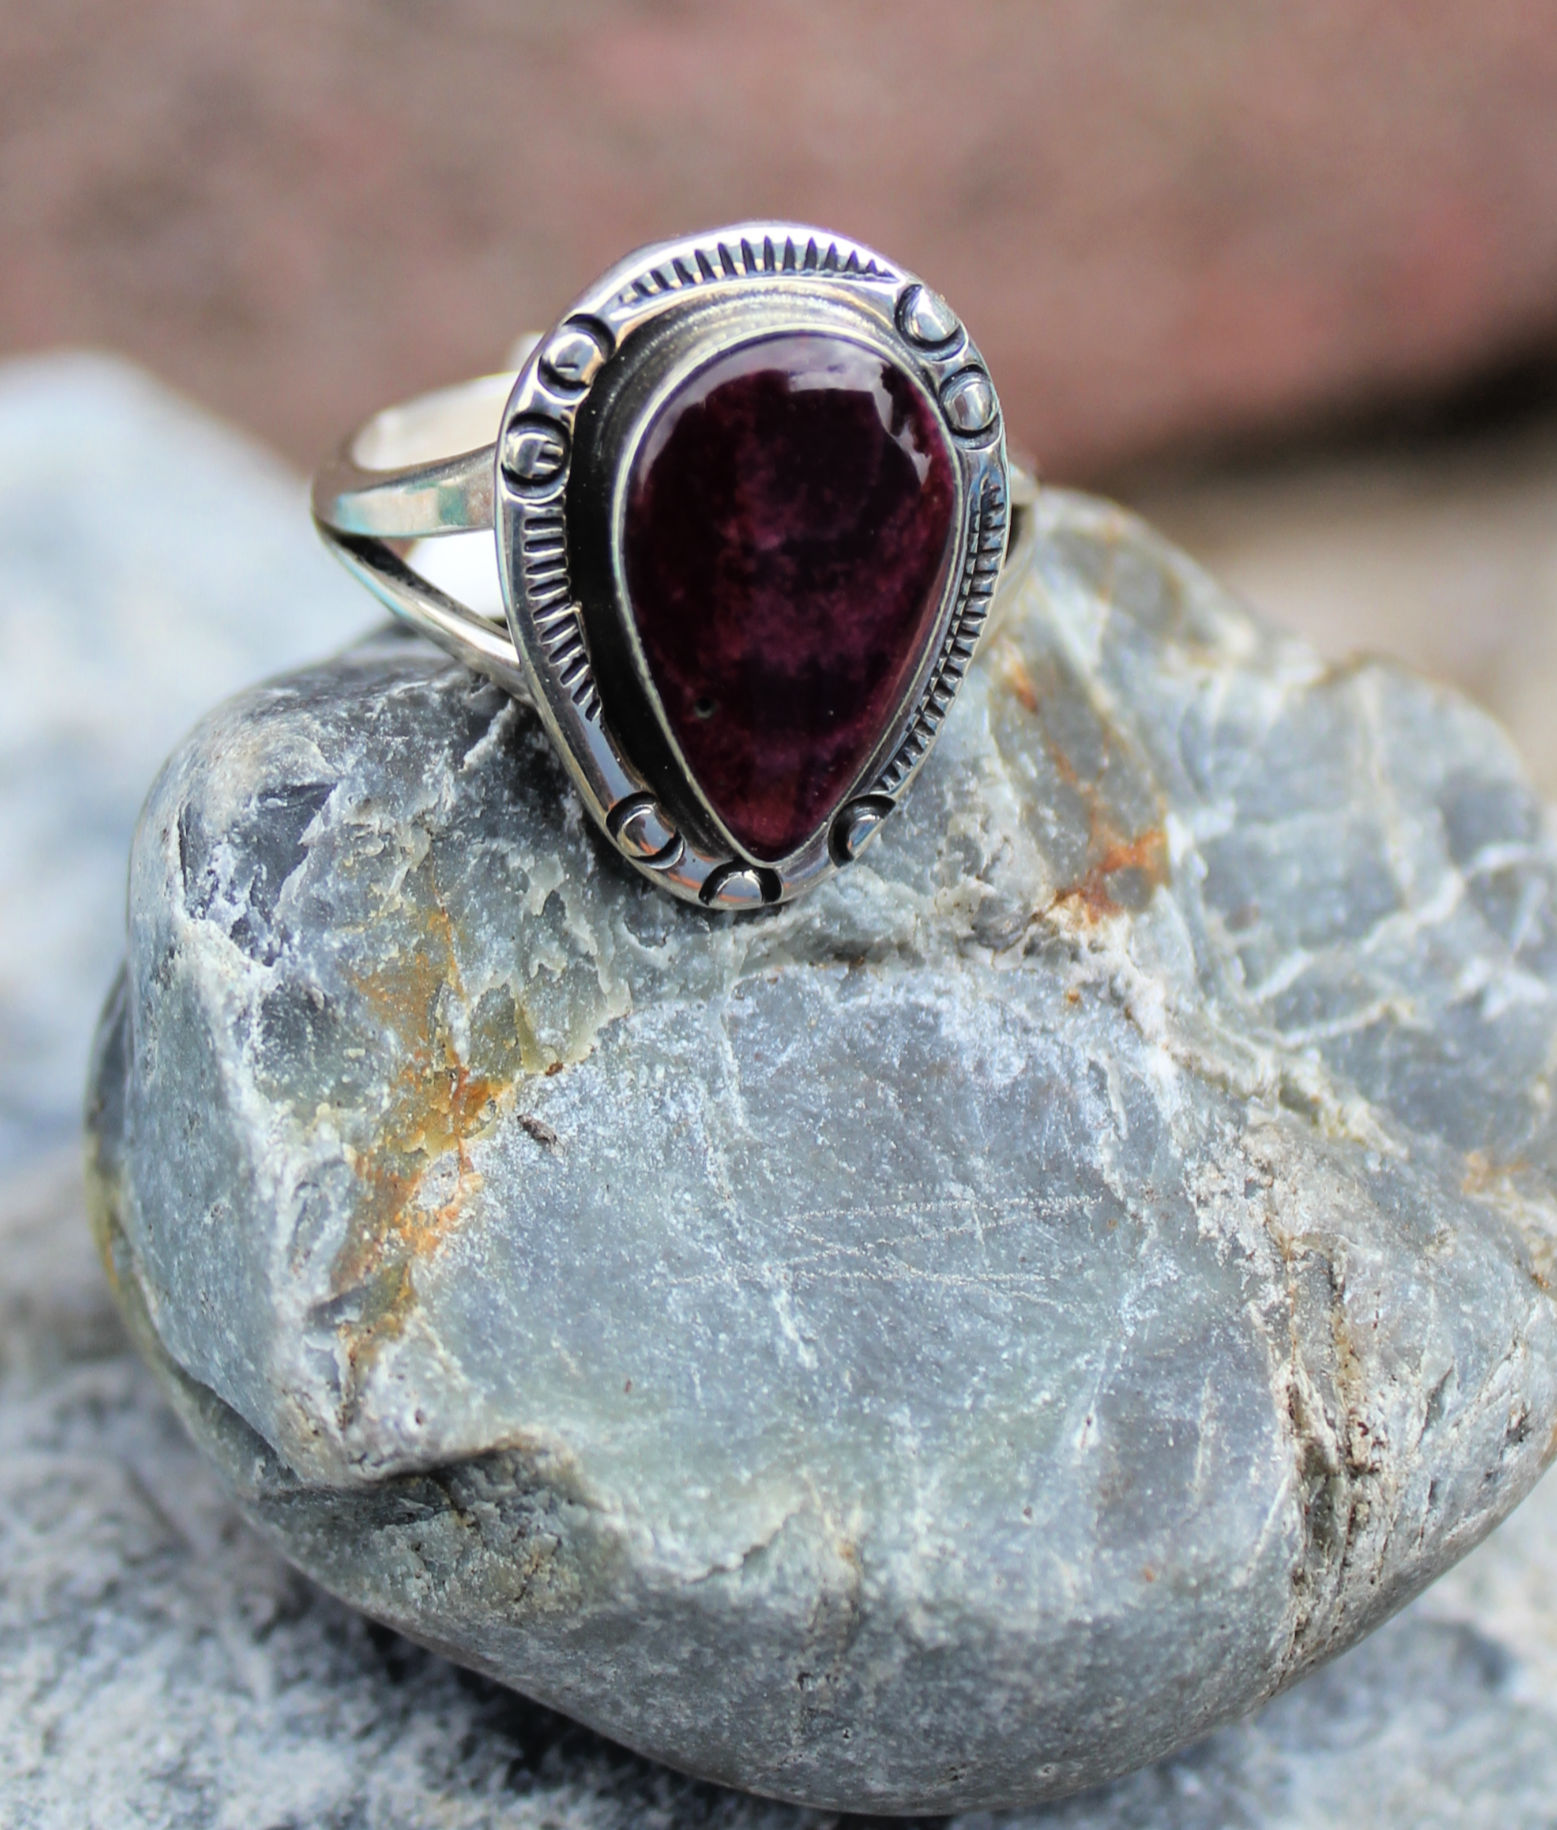 Details about   Navajo Design Purple Spiny Oyster  Sterling Silver Ring Set 5.75 4453 